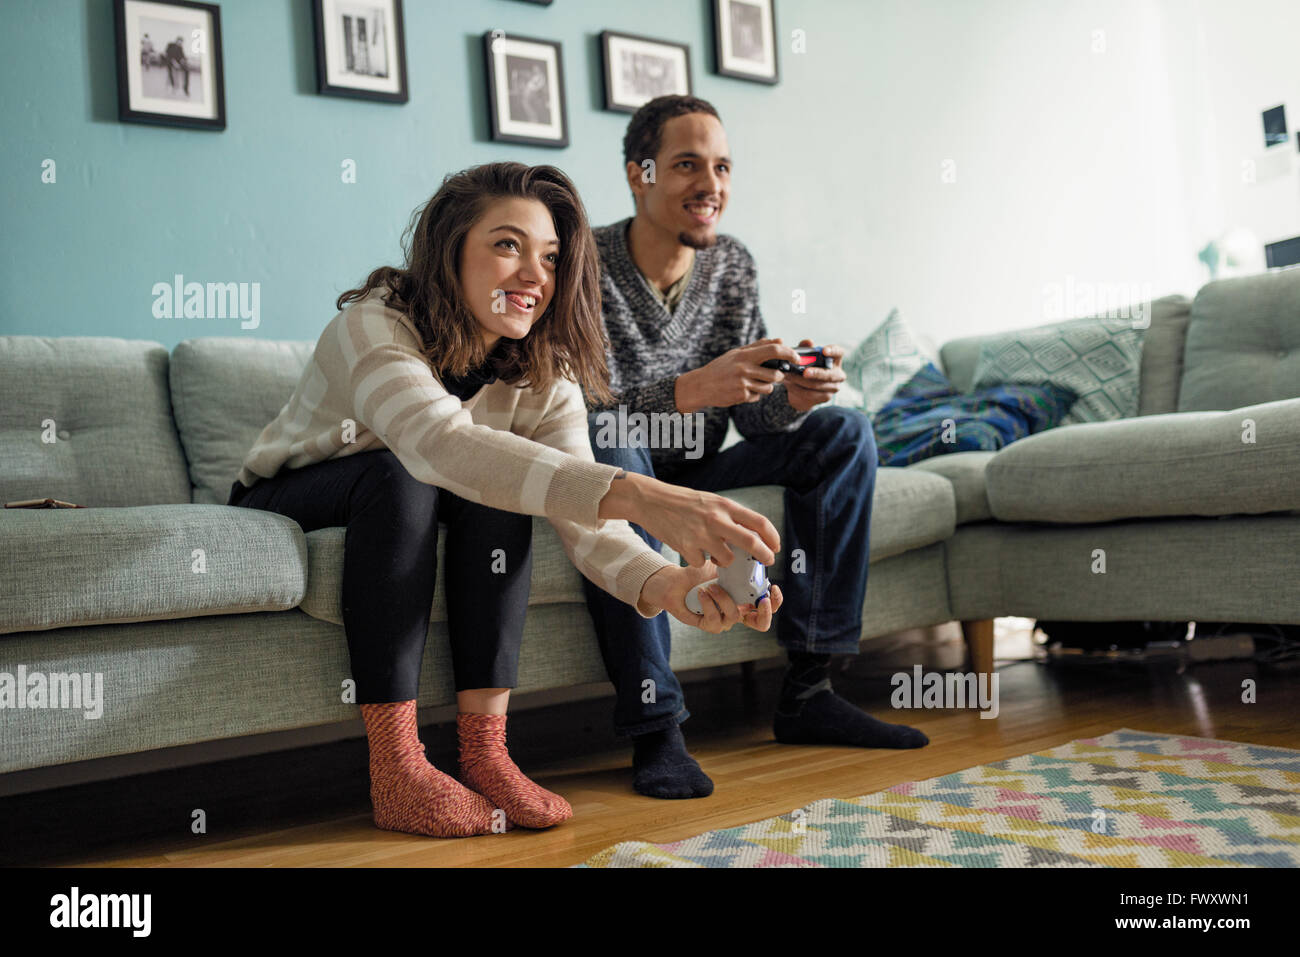 Sweden, Young couple playing video games in living room Stock Photo